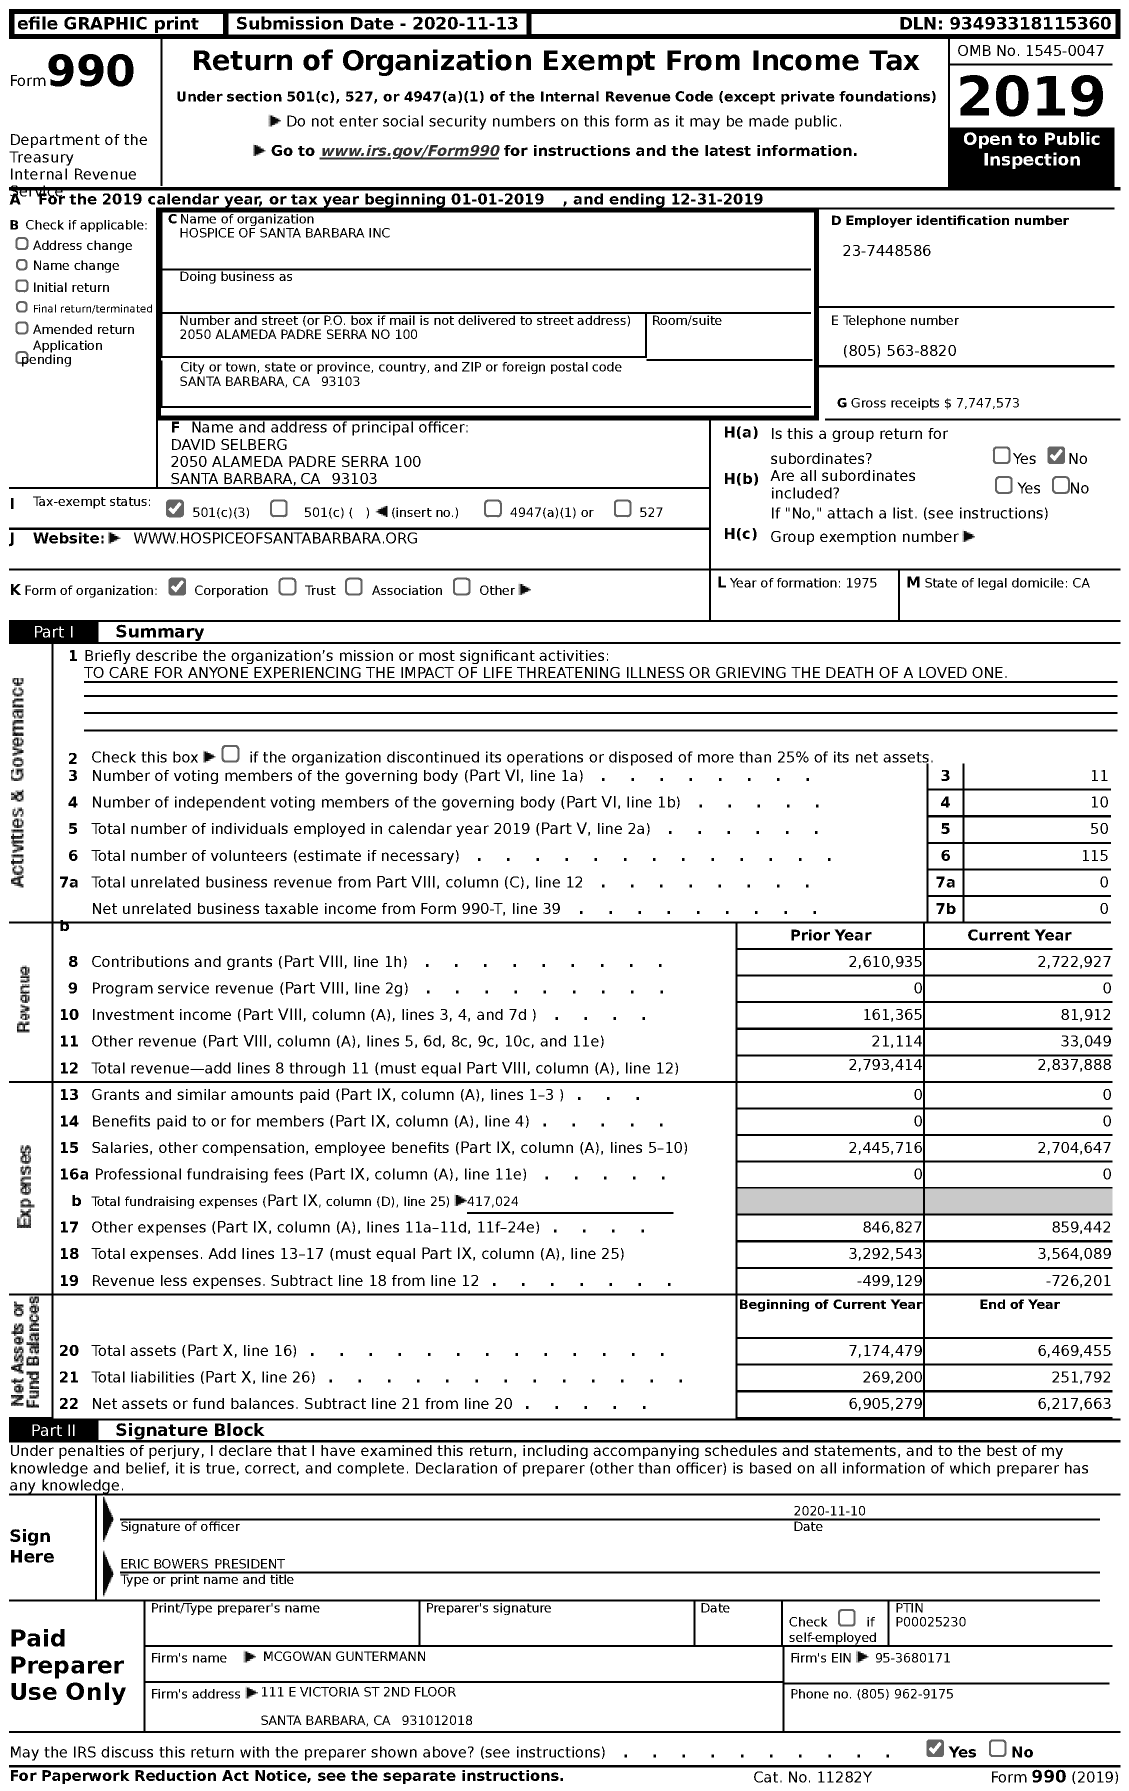 Image of first page of 2019 Form 990 for Hospice of Santa Barbara (HSB)